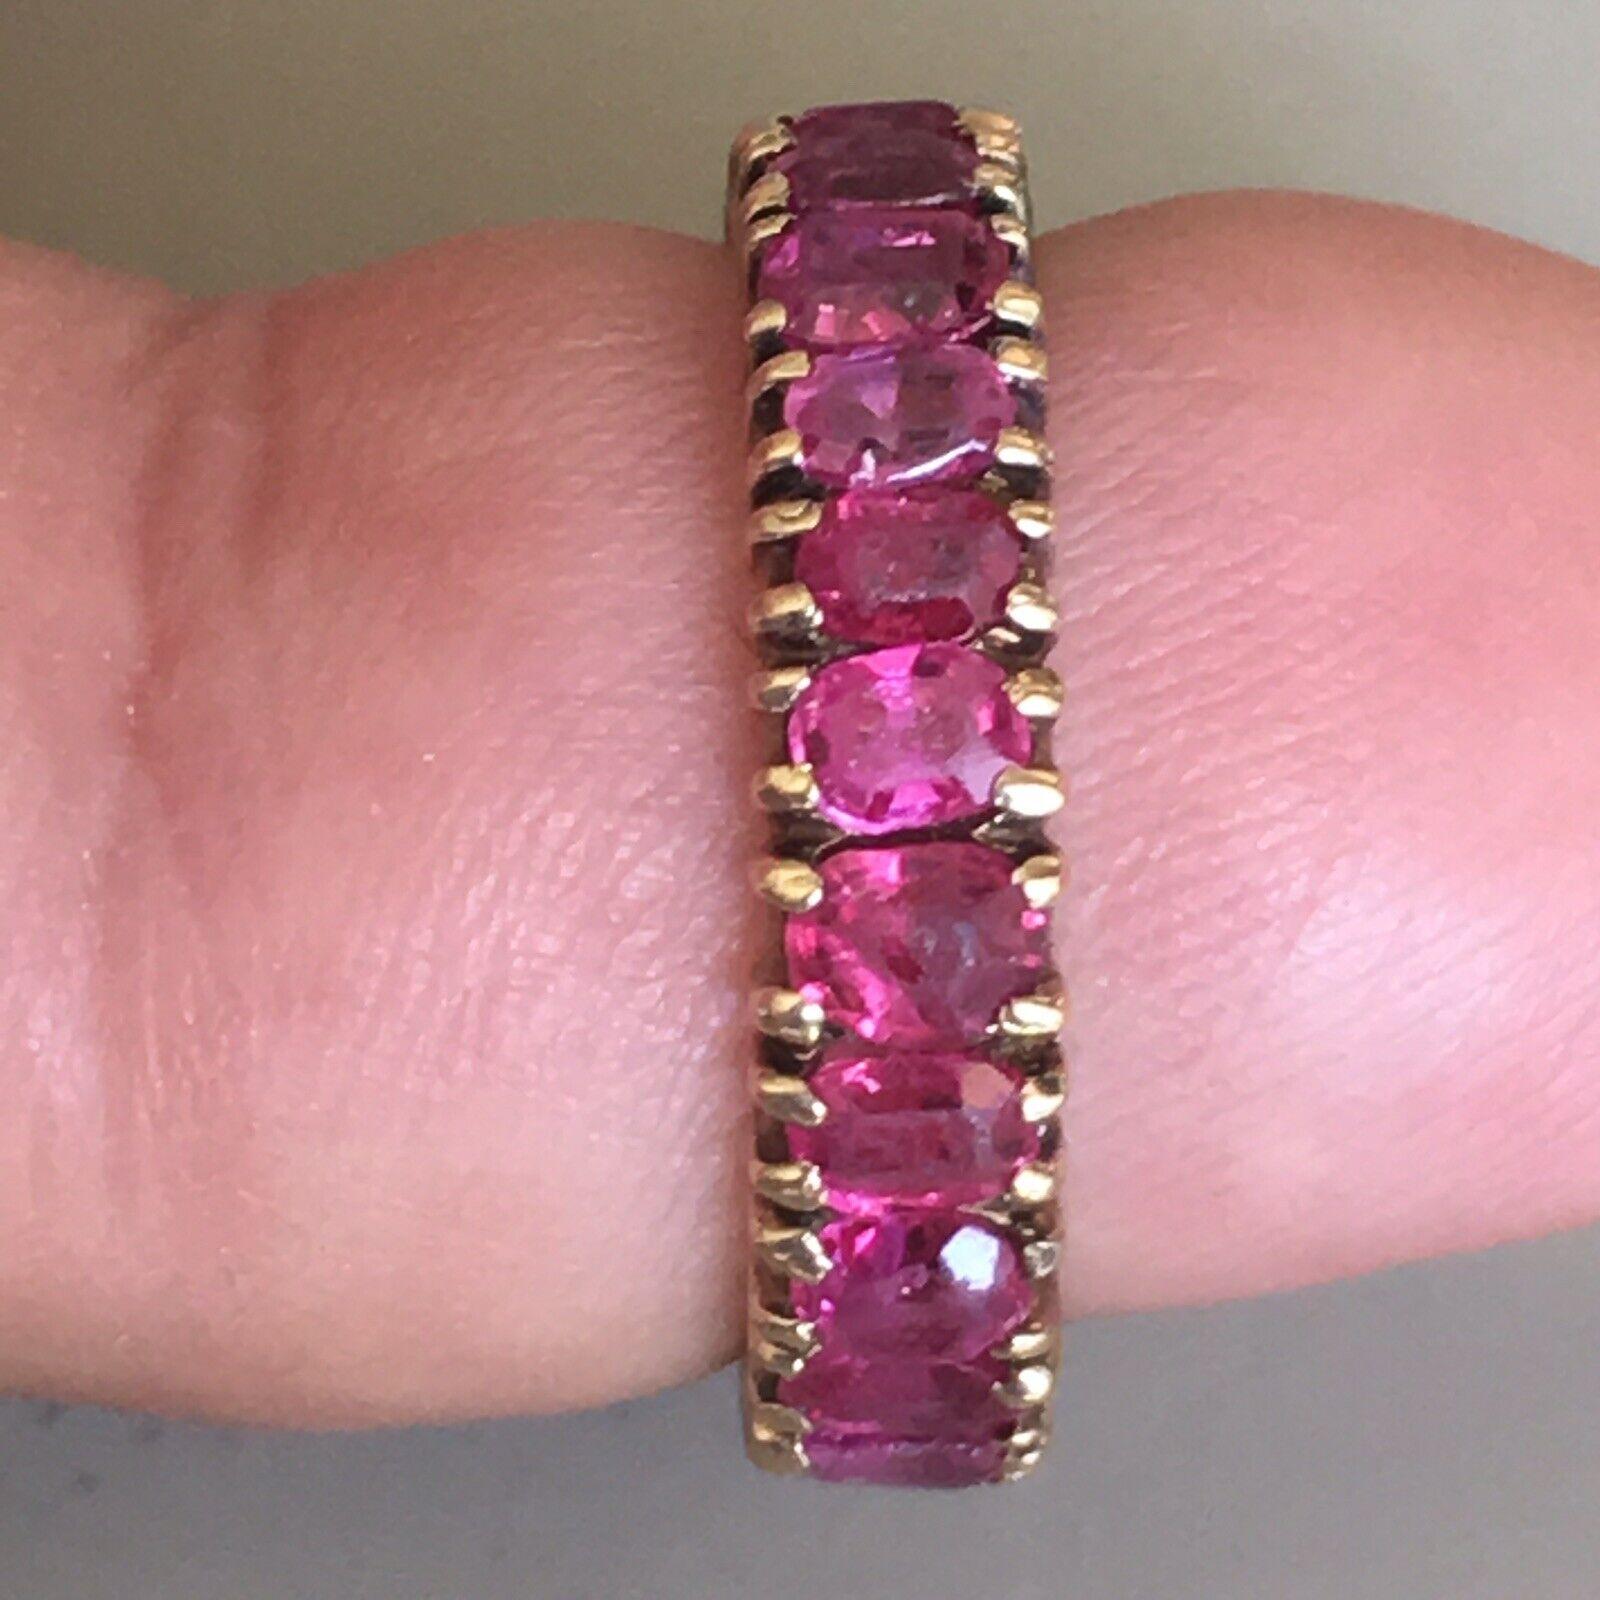 14 Karat yellow gold 4.5 mm wide eternity band finger size 6 weighting 3.1 gram, 

22 pieces of 4 mm by 3 mm Old Cushion Cut Natural Burmese Rubies in excellent condition, most likely unheated 

Victorian era, Circa 1880s 
American made

Authentic